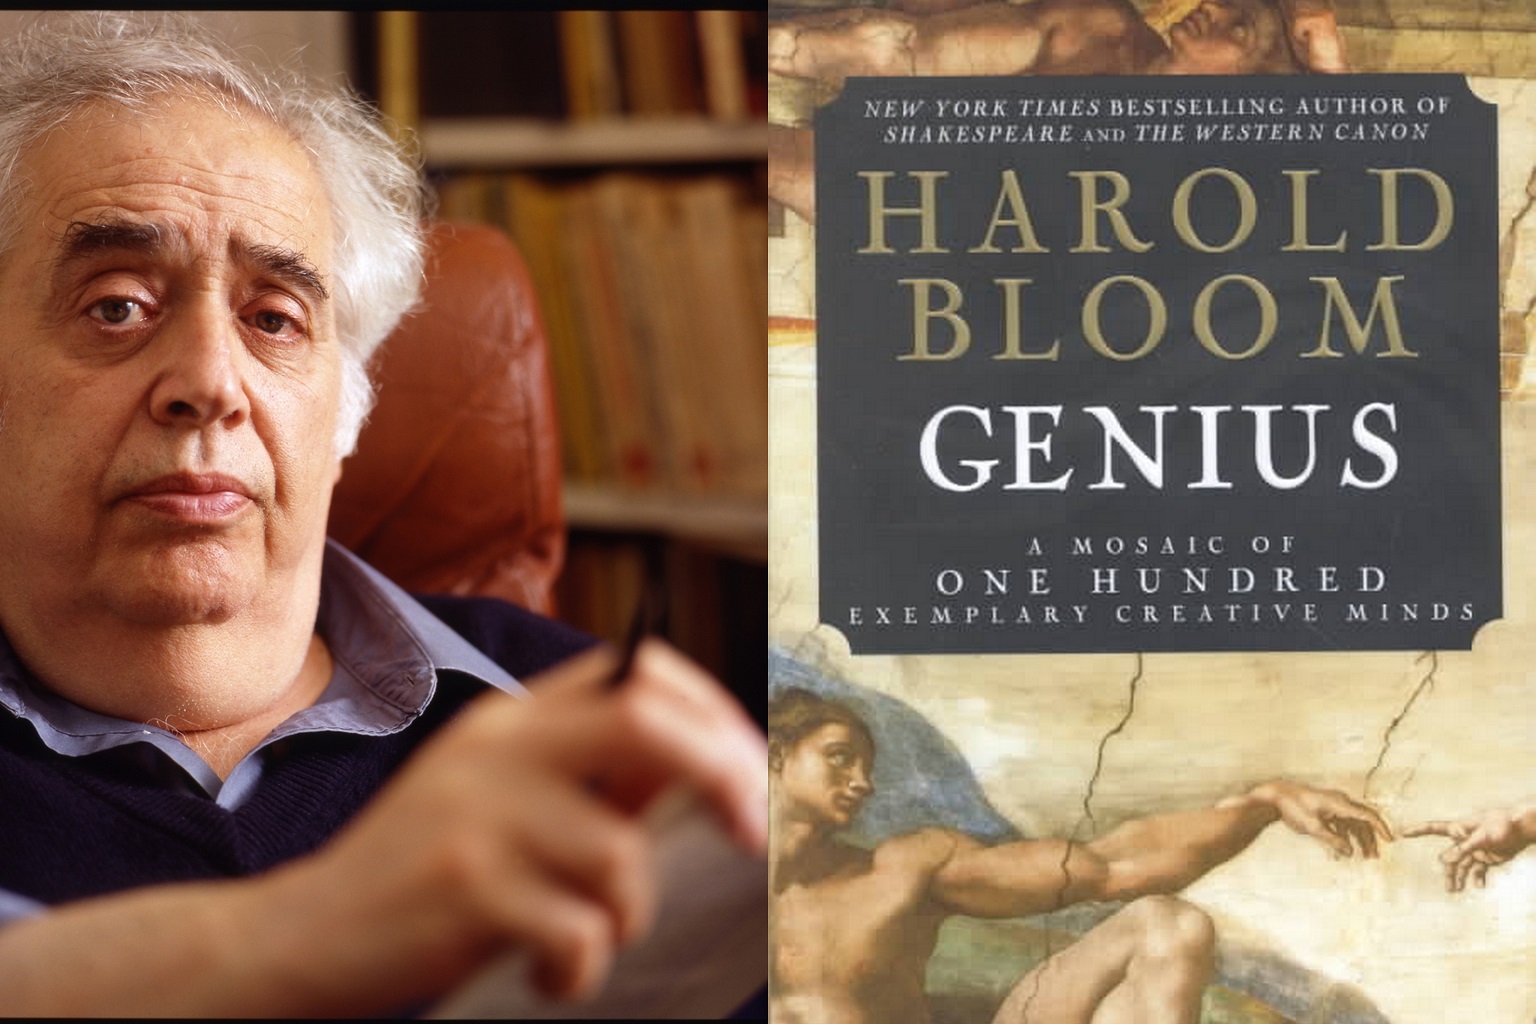 Bloom & Genius for What Do We Really Want to Know About a Writer?